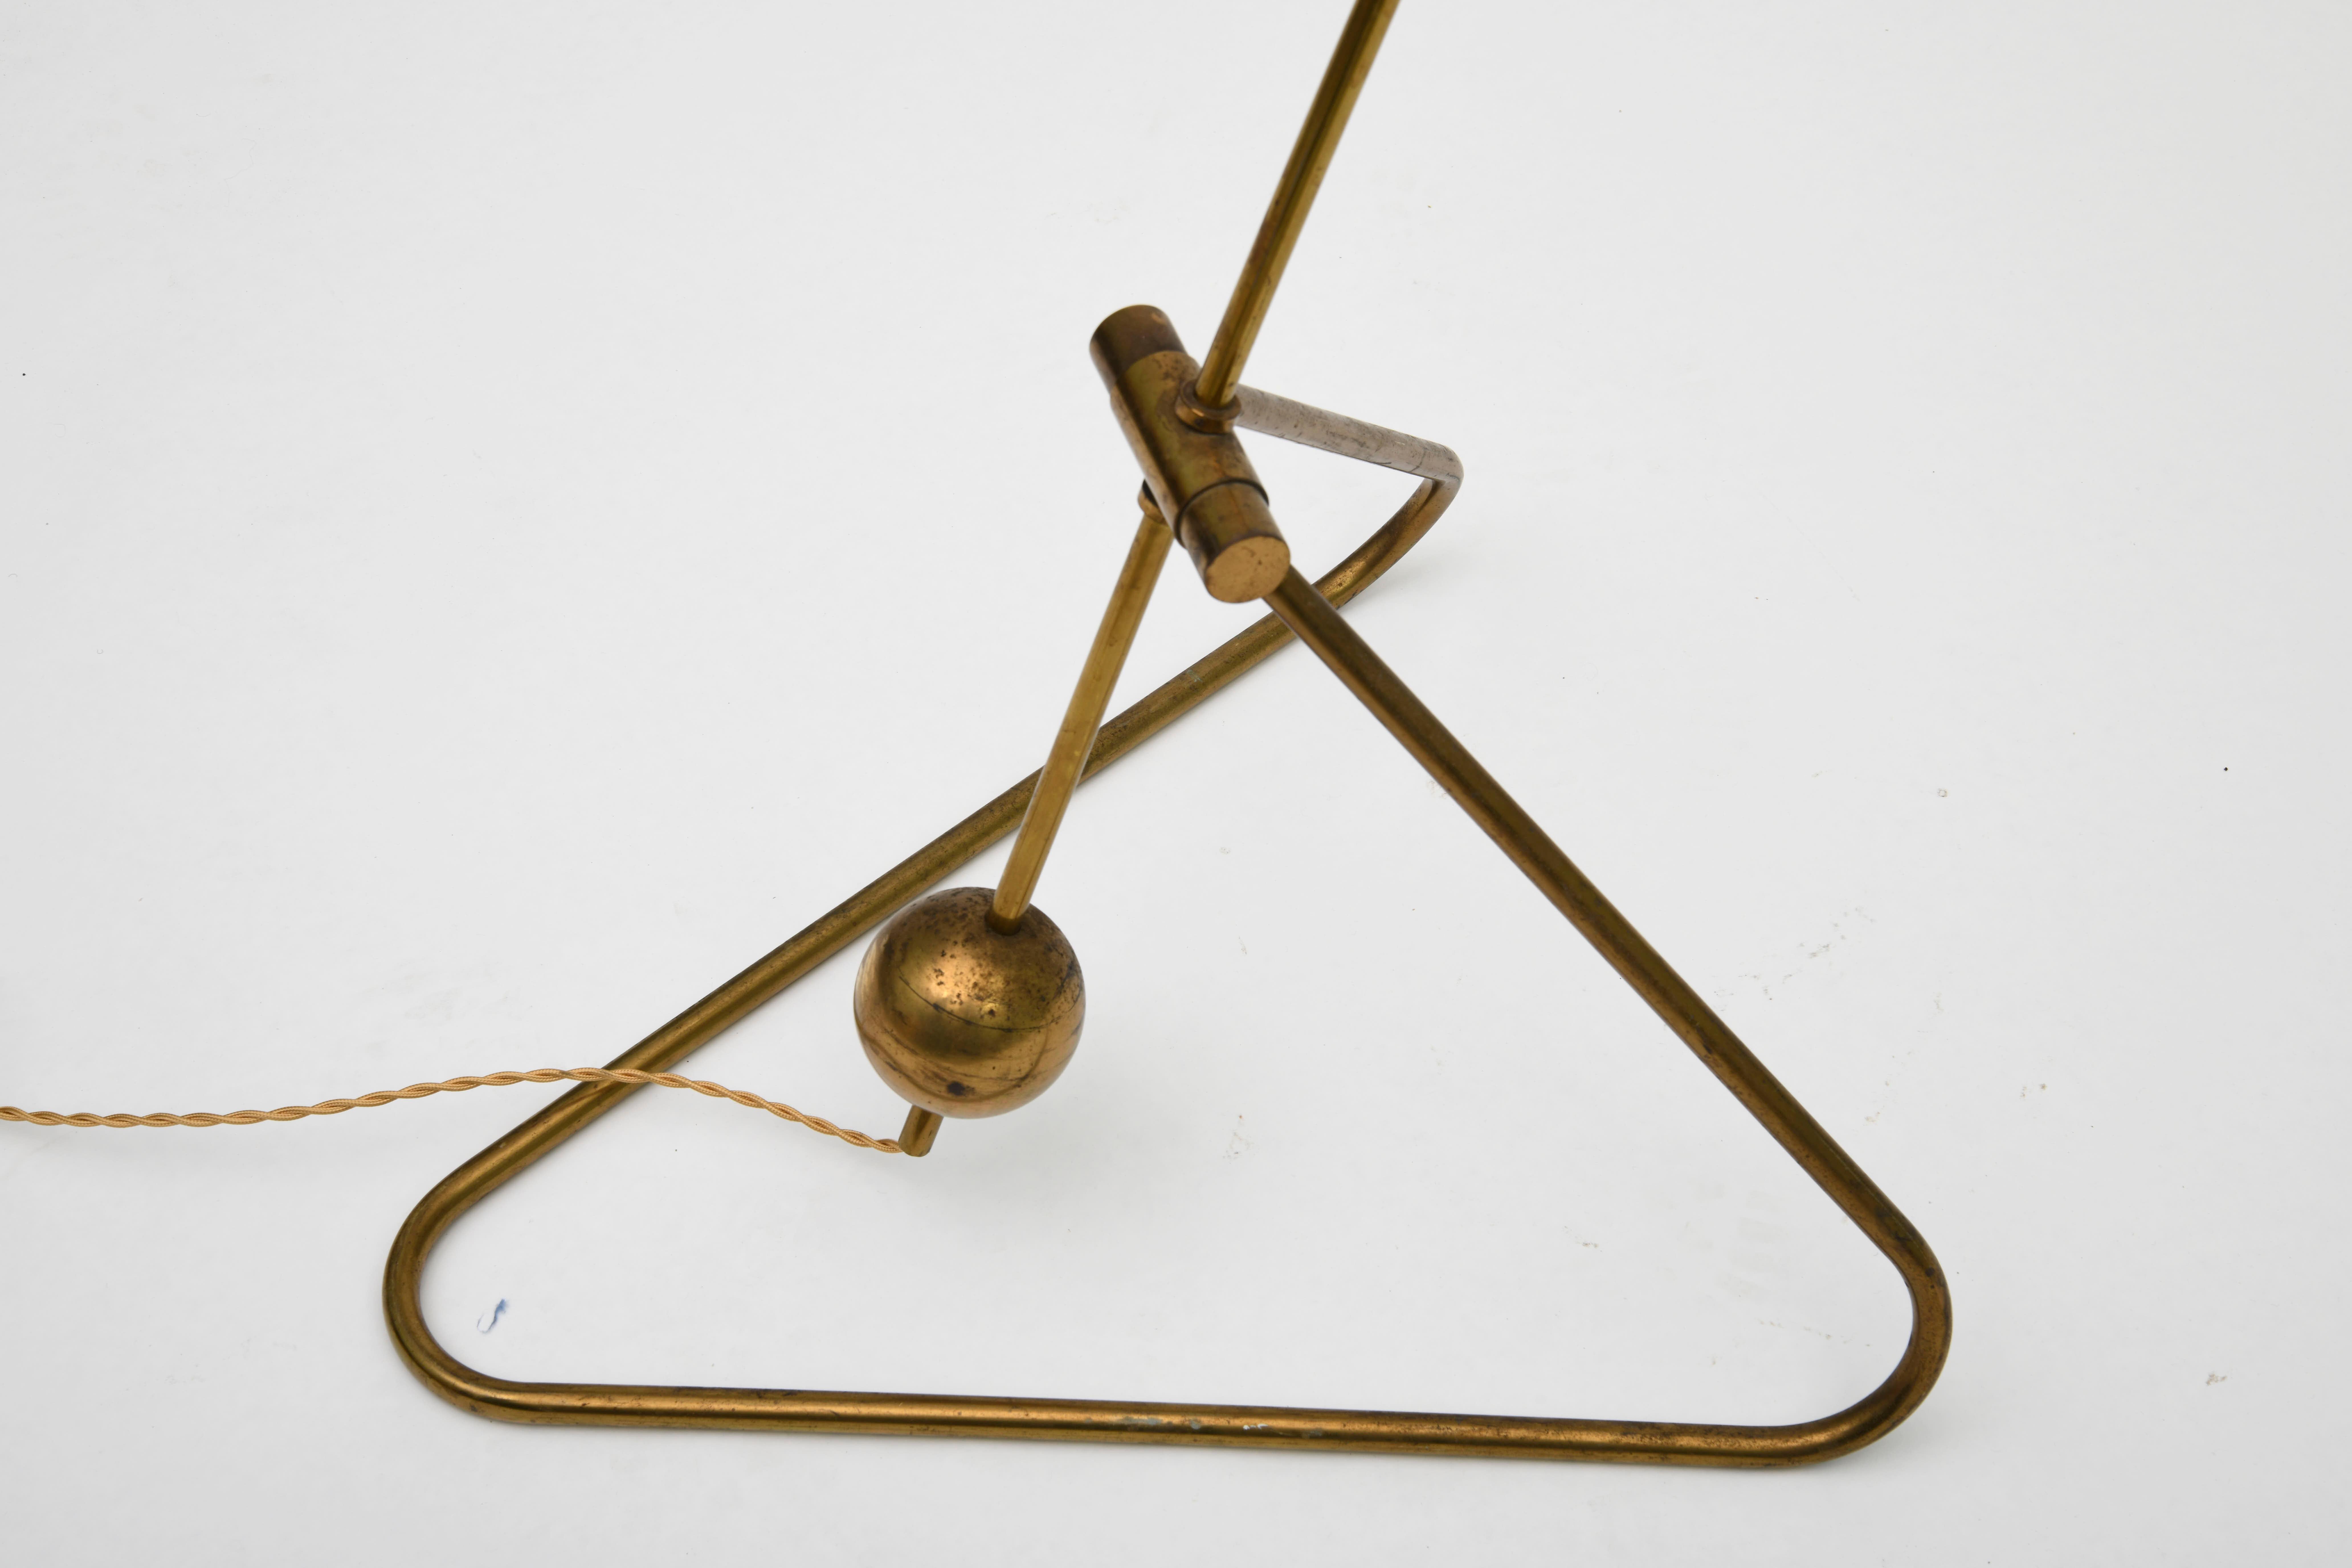 Robert Mathieu
Floor lamp, circa 1950
Brass
Measures: 83 H x 19 W x 17 D inches
210.8 H x 48.3 W x 43.2 D cm
Base: 20 x 17 inches / 50.8 x 43.2 cm

The base and shades of the lamp swivel in order to direct the light. Very good vintage